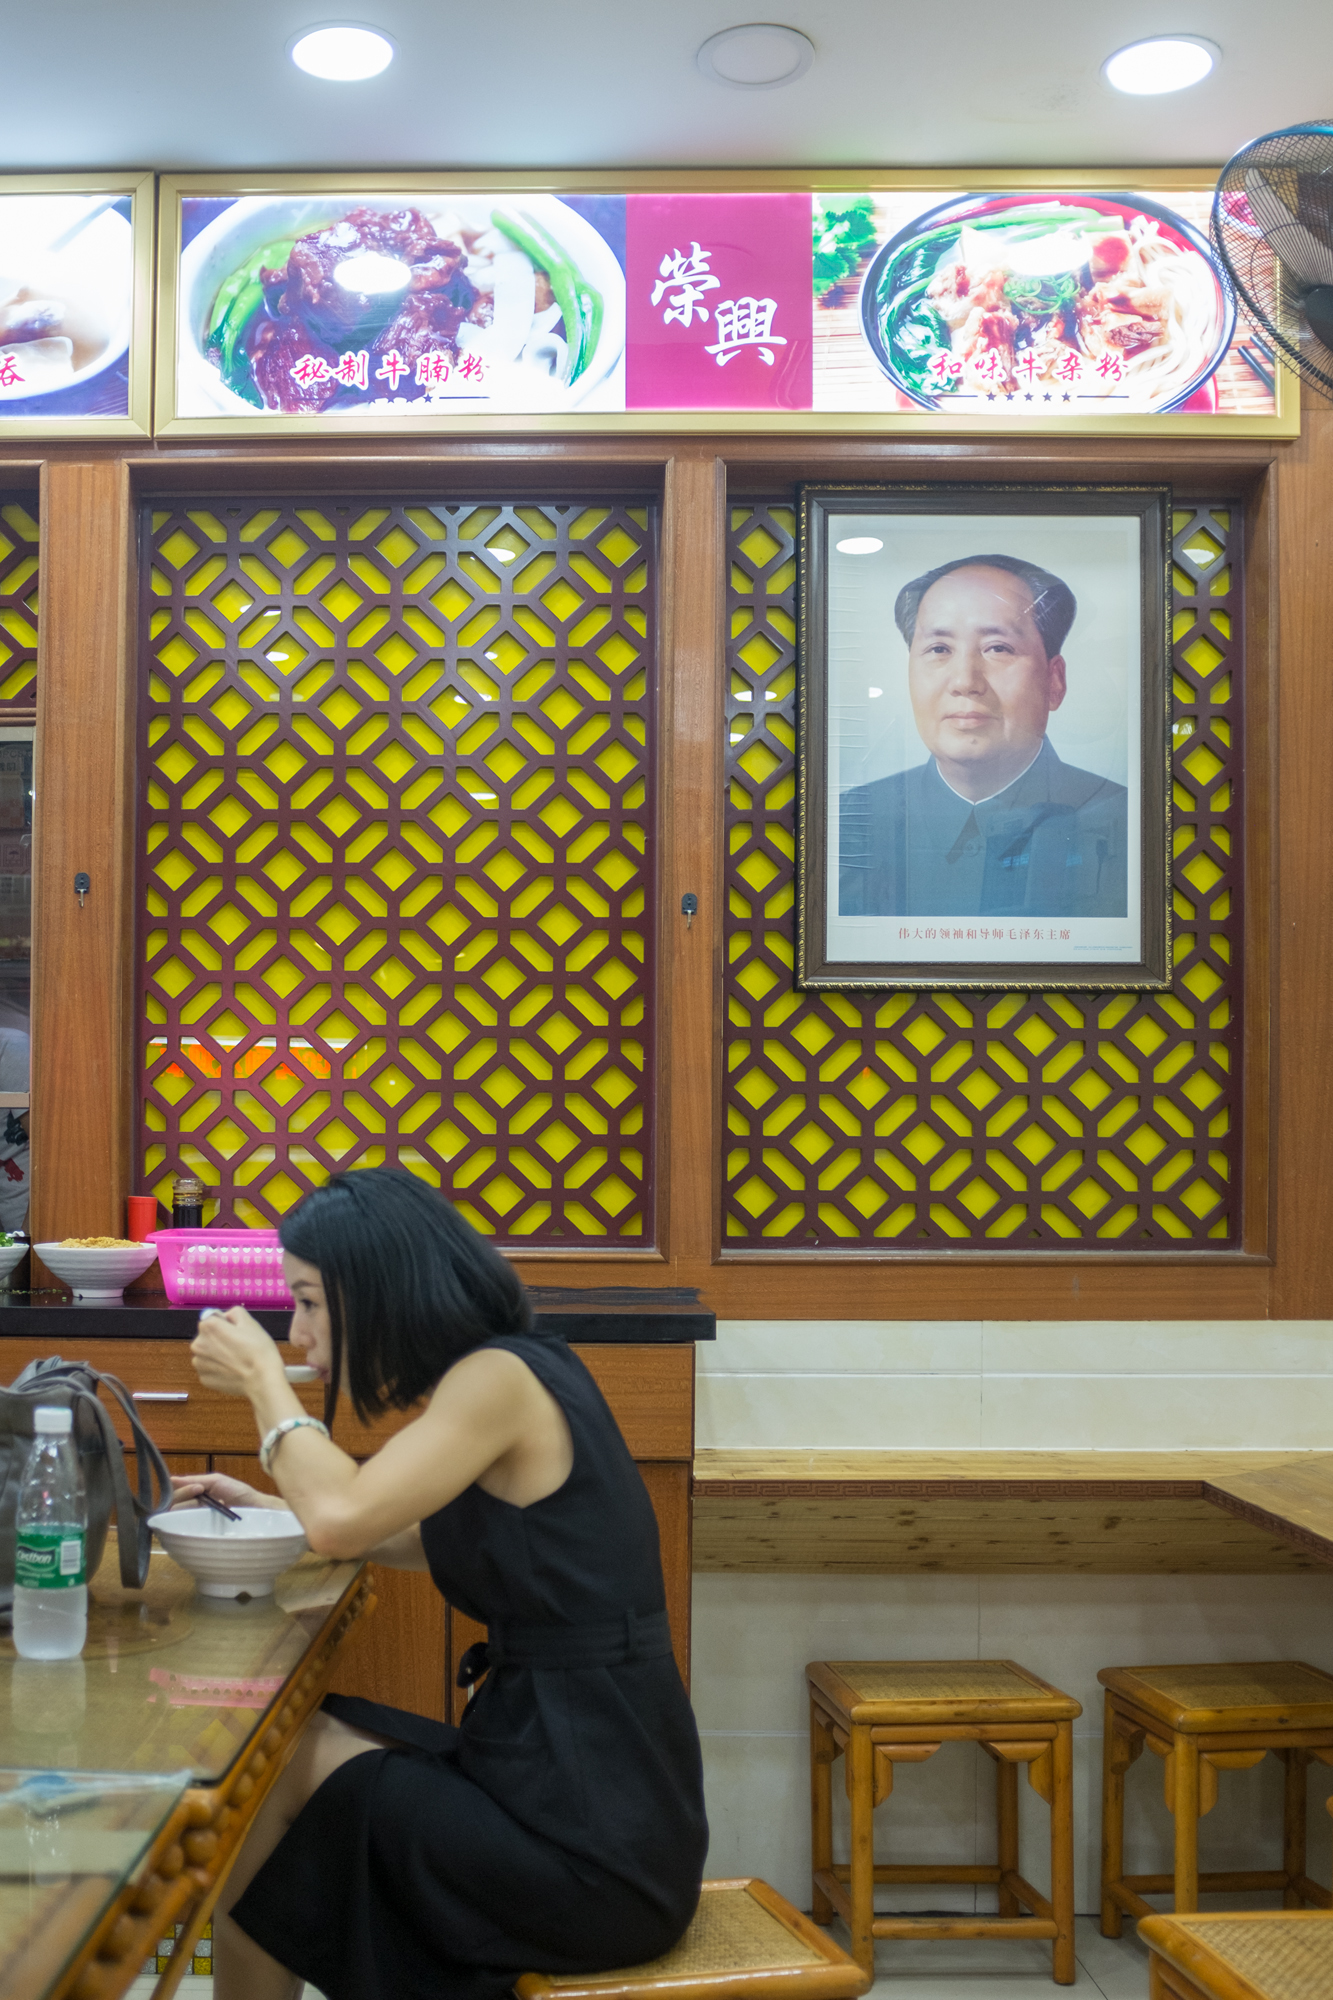 Chairman Mao overseeing noodle shop